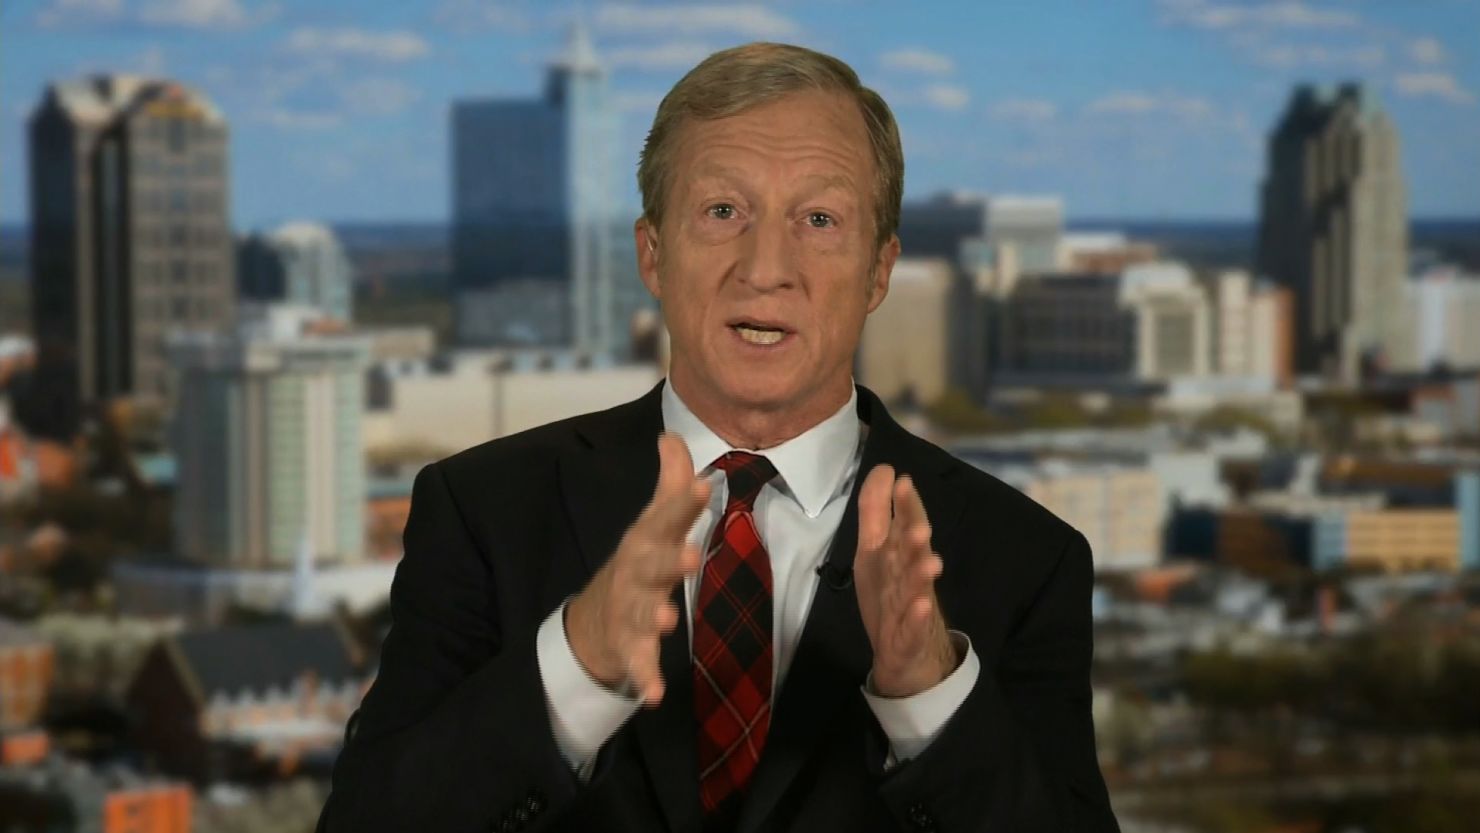 Tom Steyer is a longtime Democratic donor who walked away from his hedge fund in 2012 to pursue political activism full time.